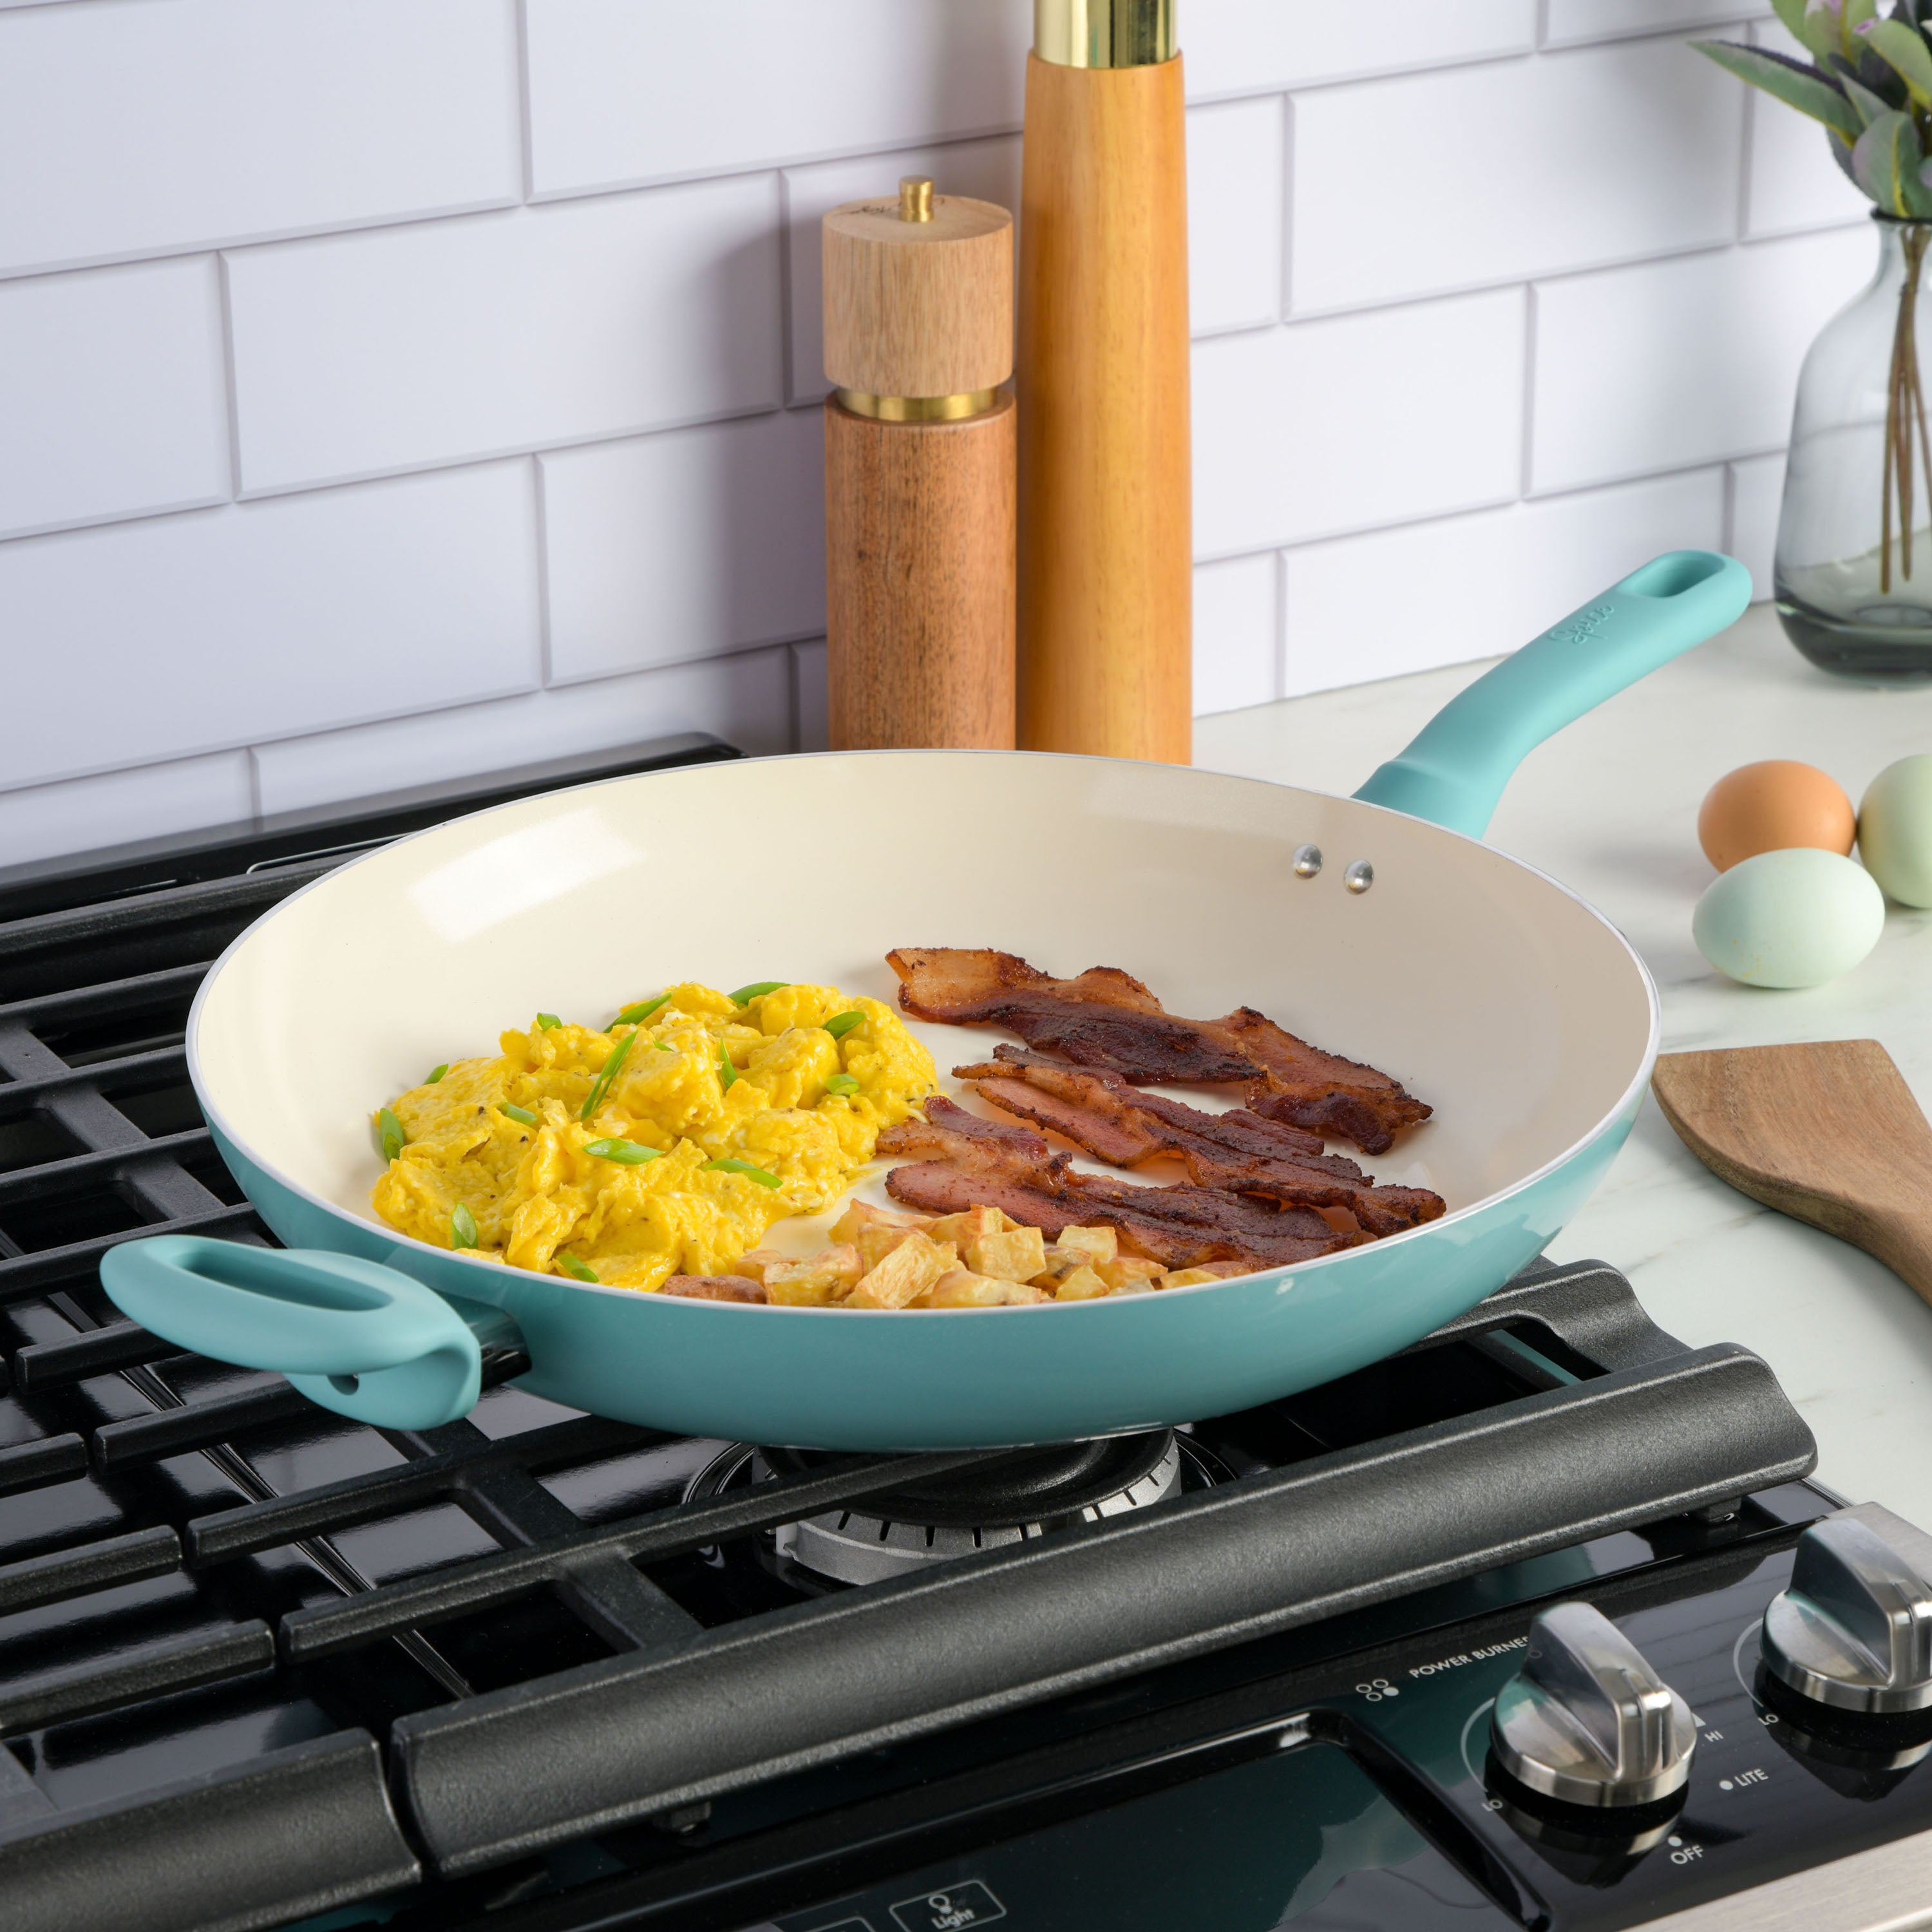 Spice By Tia Mowry Savory Saffron Pre-seasoned 2 Piece 10in And 12in Cast  Iron Skillet Set : Target